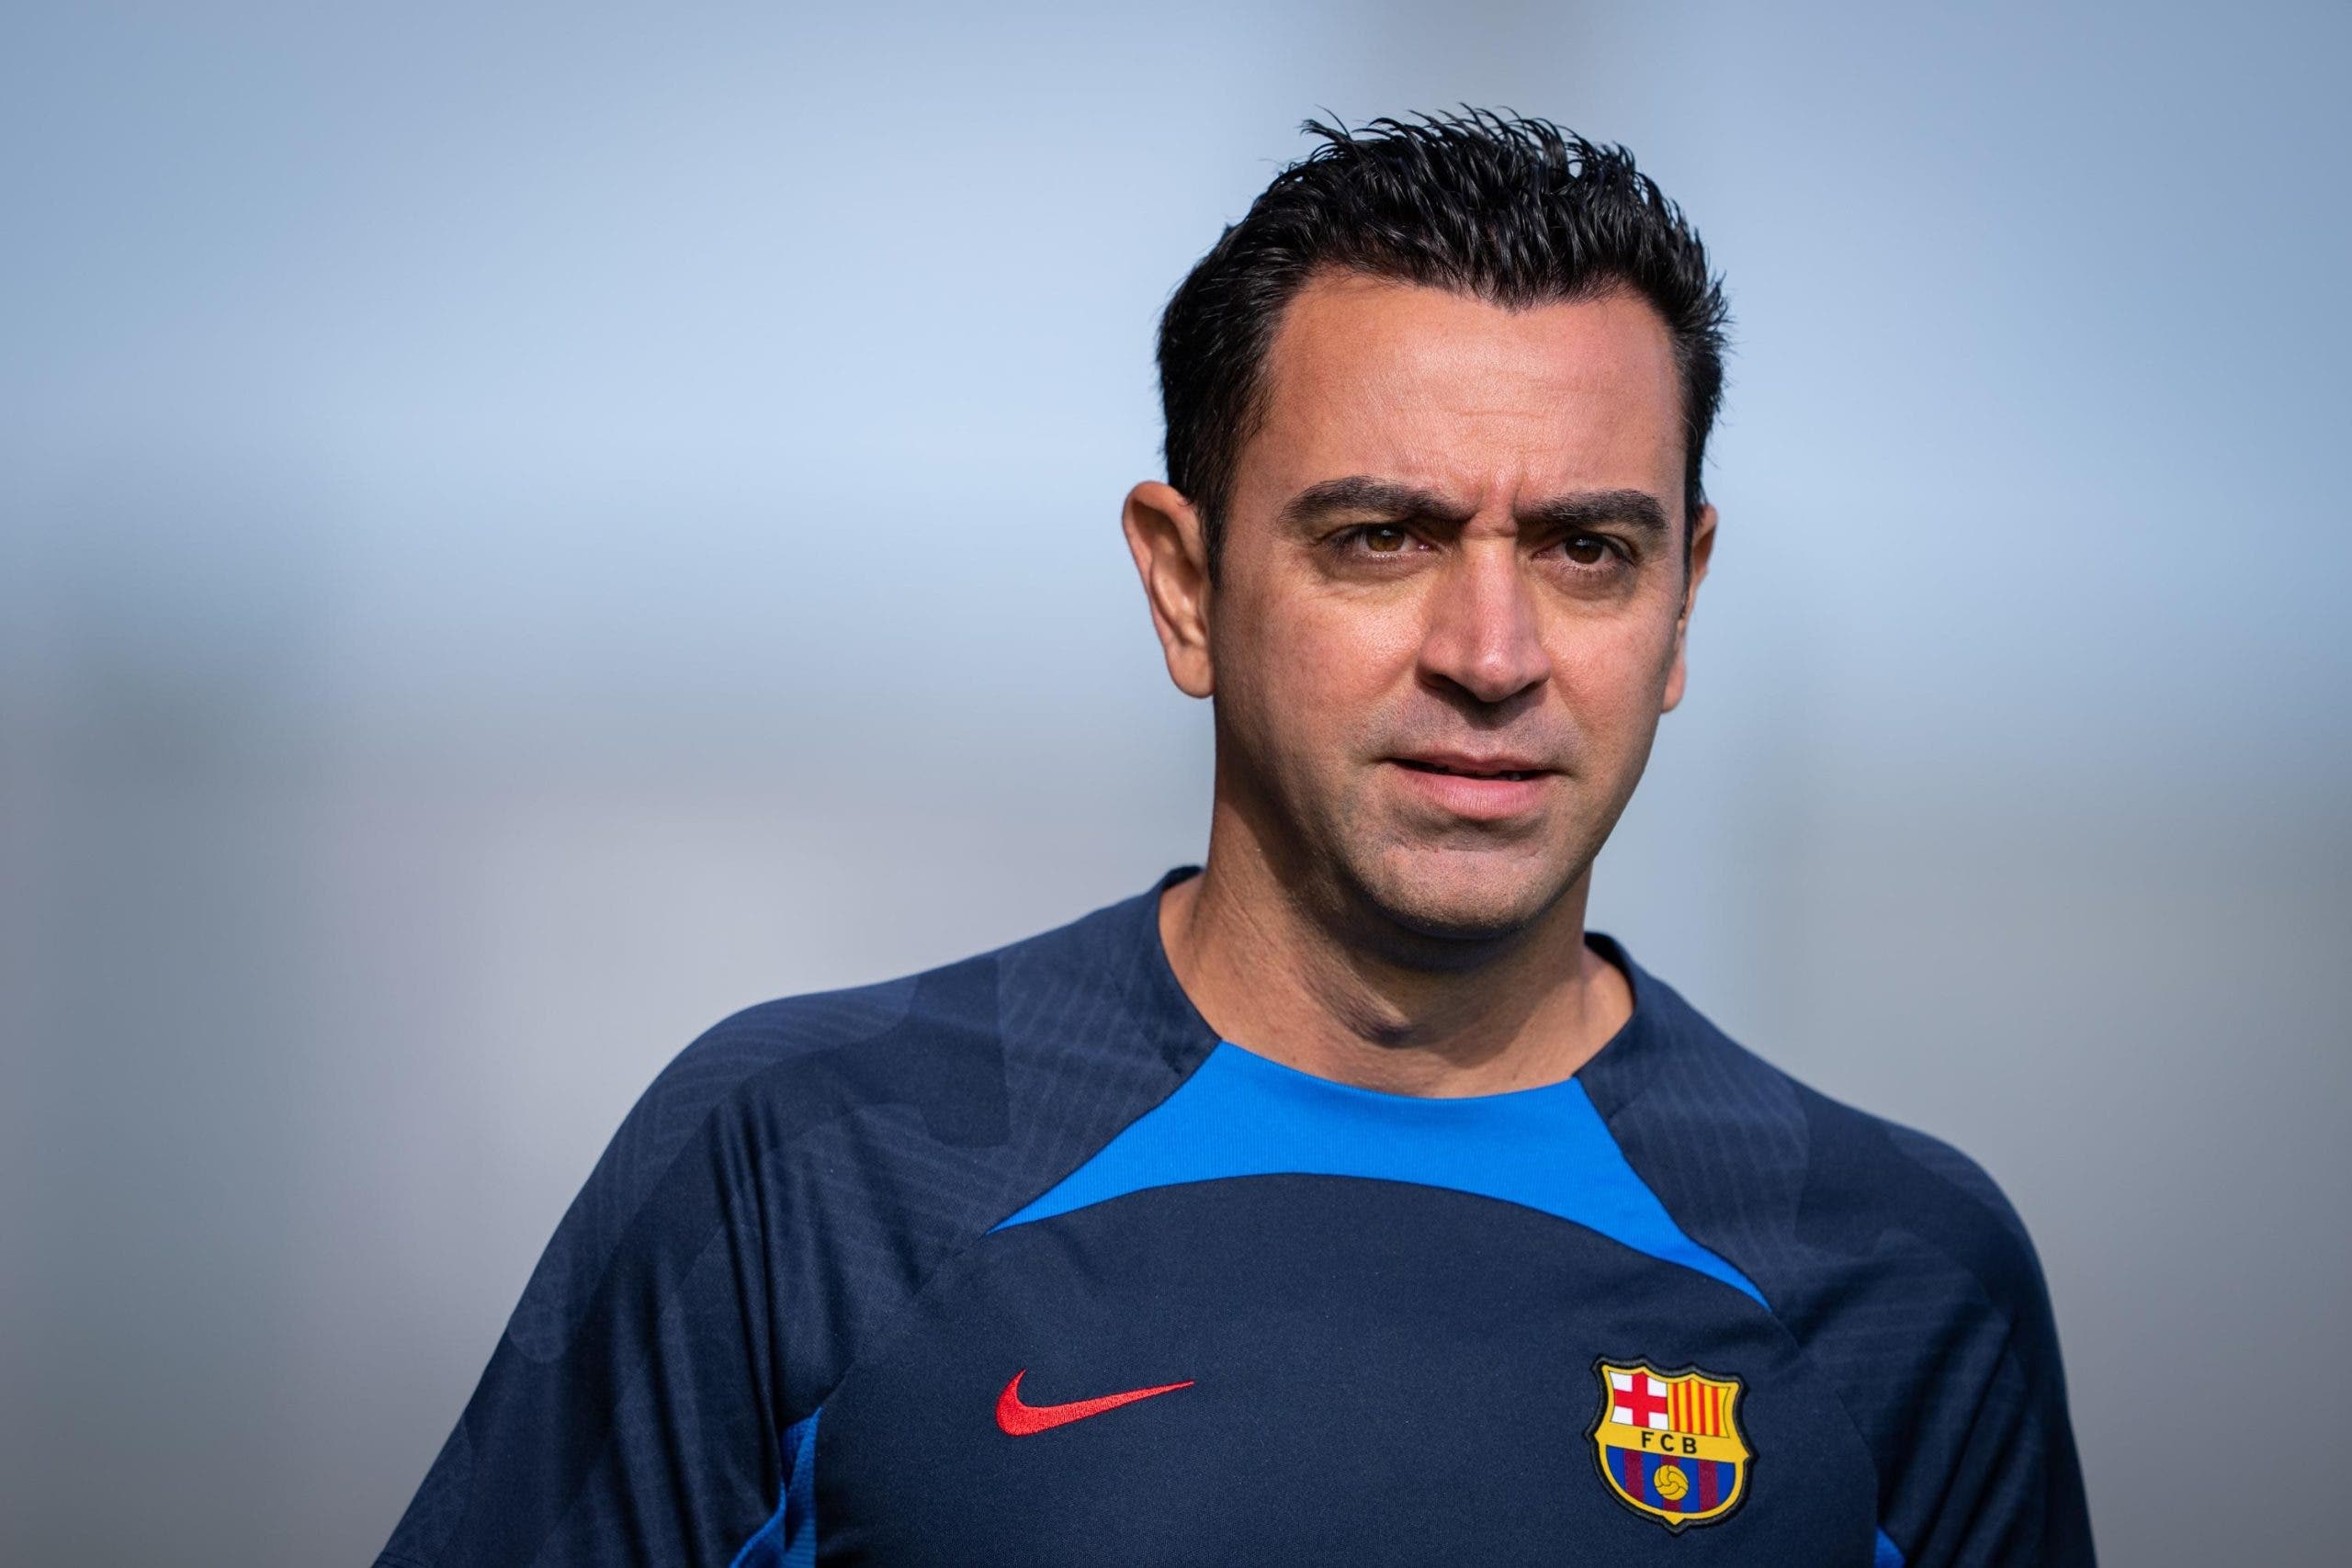 Xavi finds an emergency solution at FC Barcelona in the face of Laporta's lies
	
